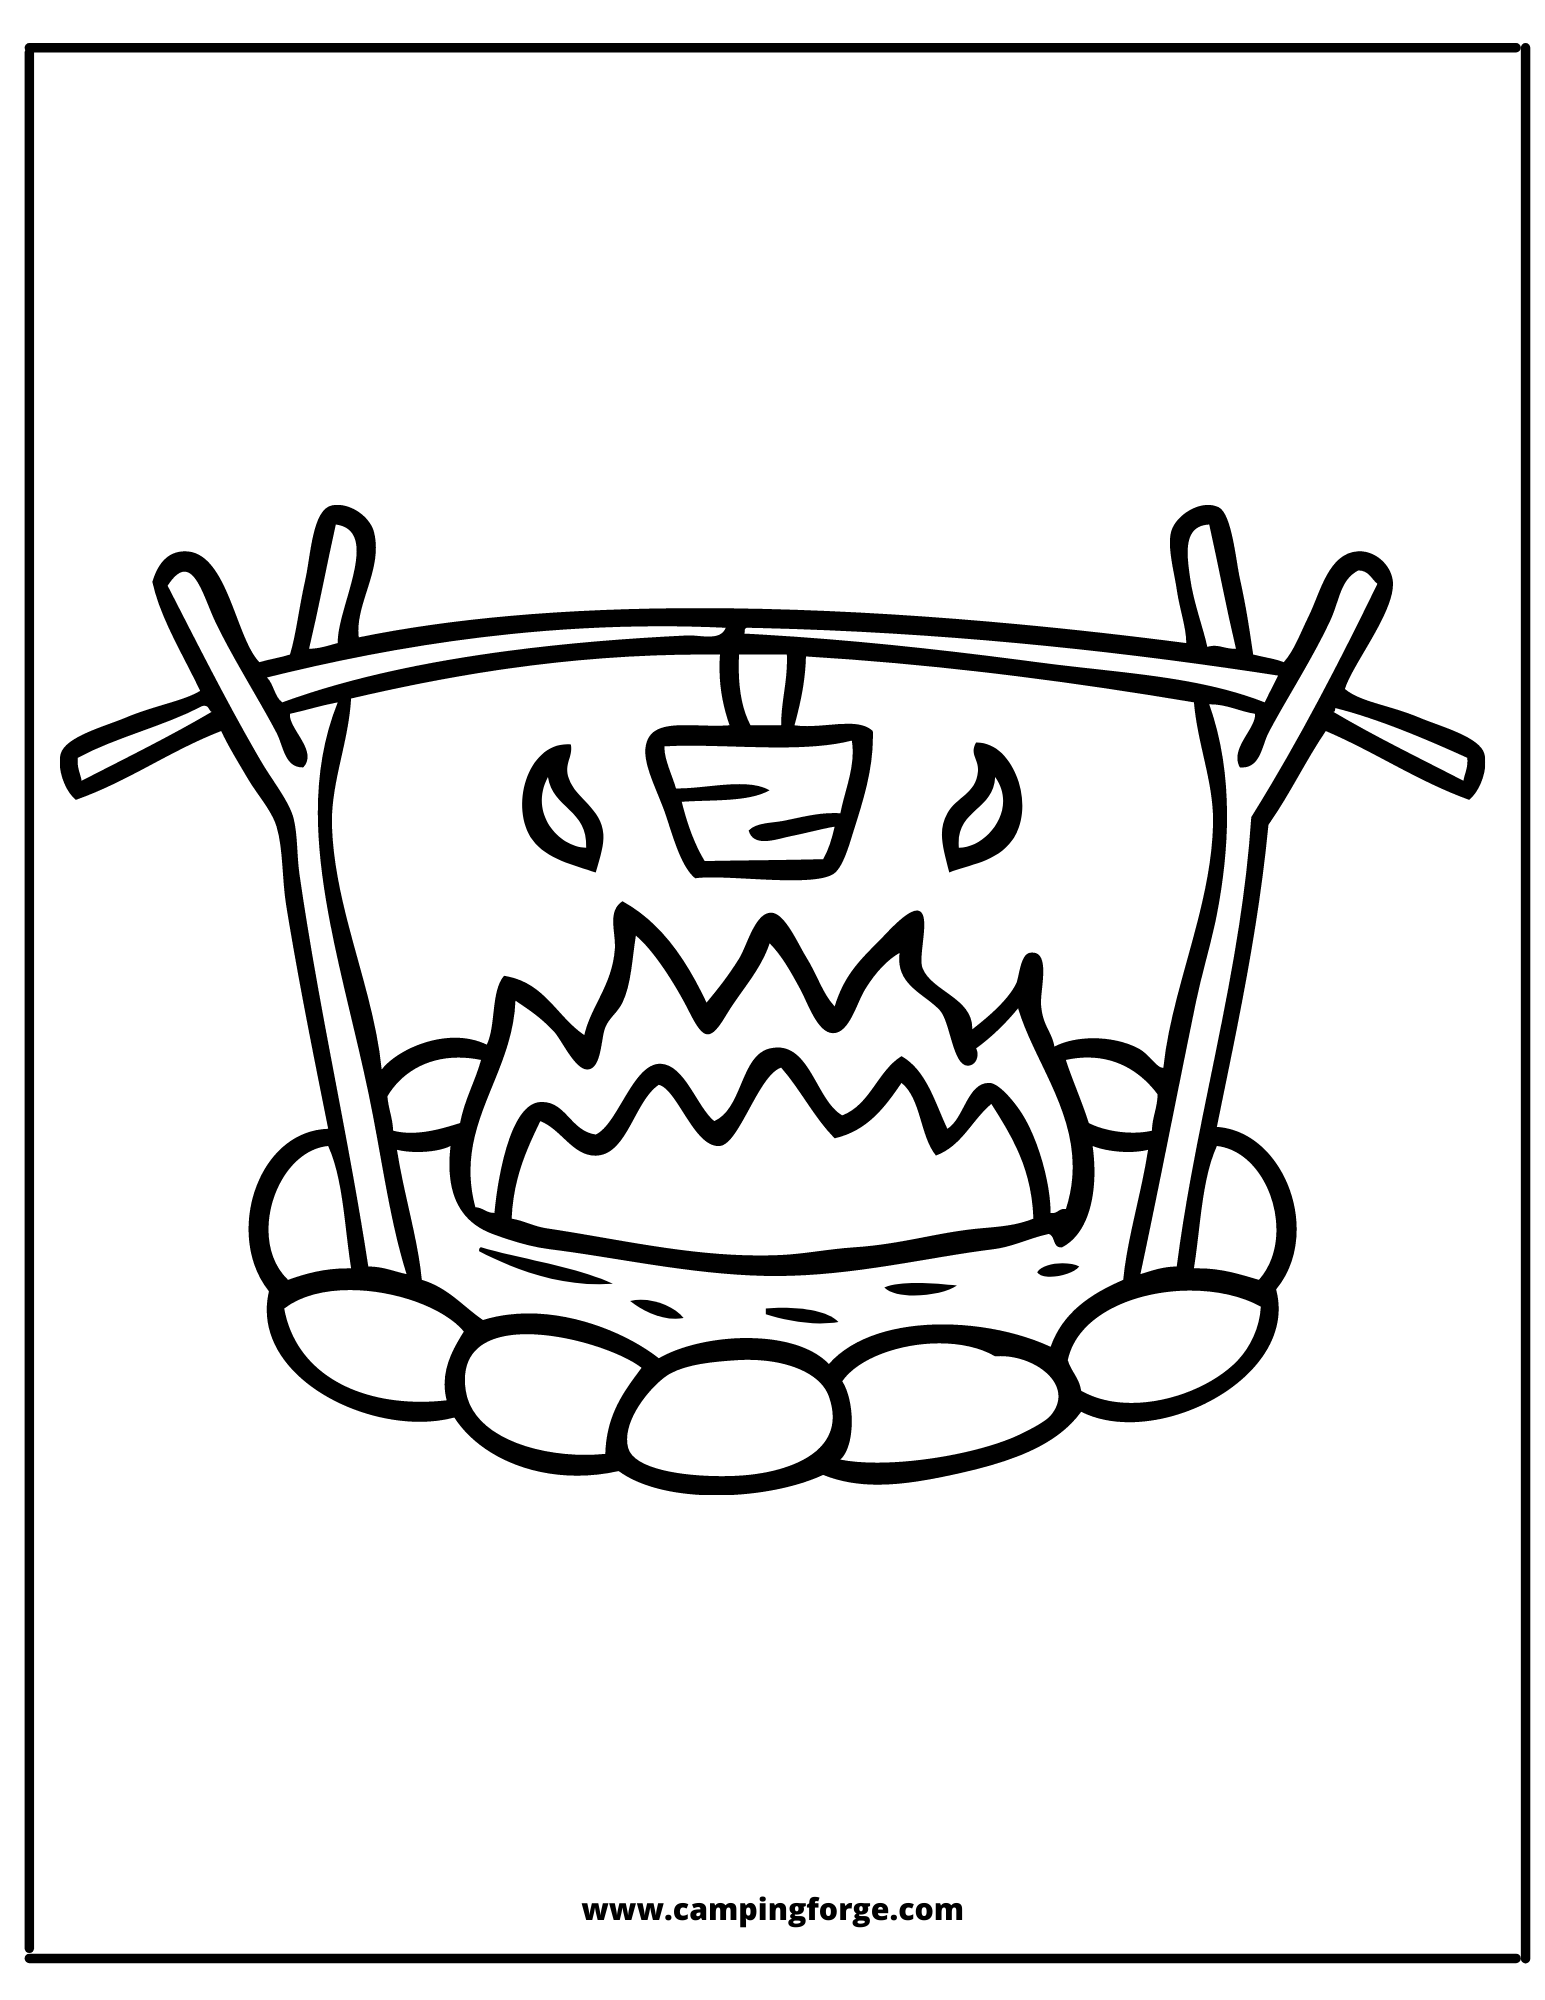 free camping themed coloring pages